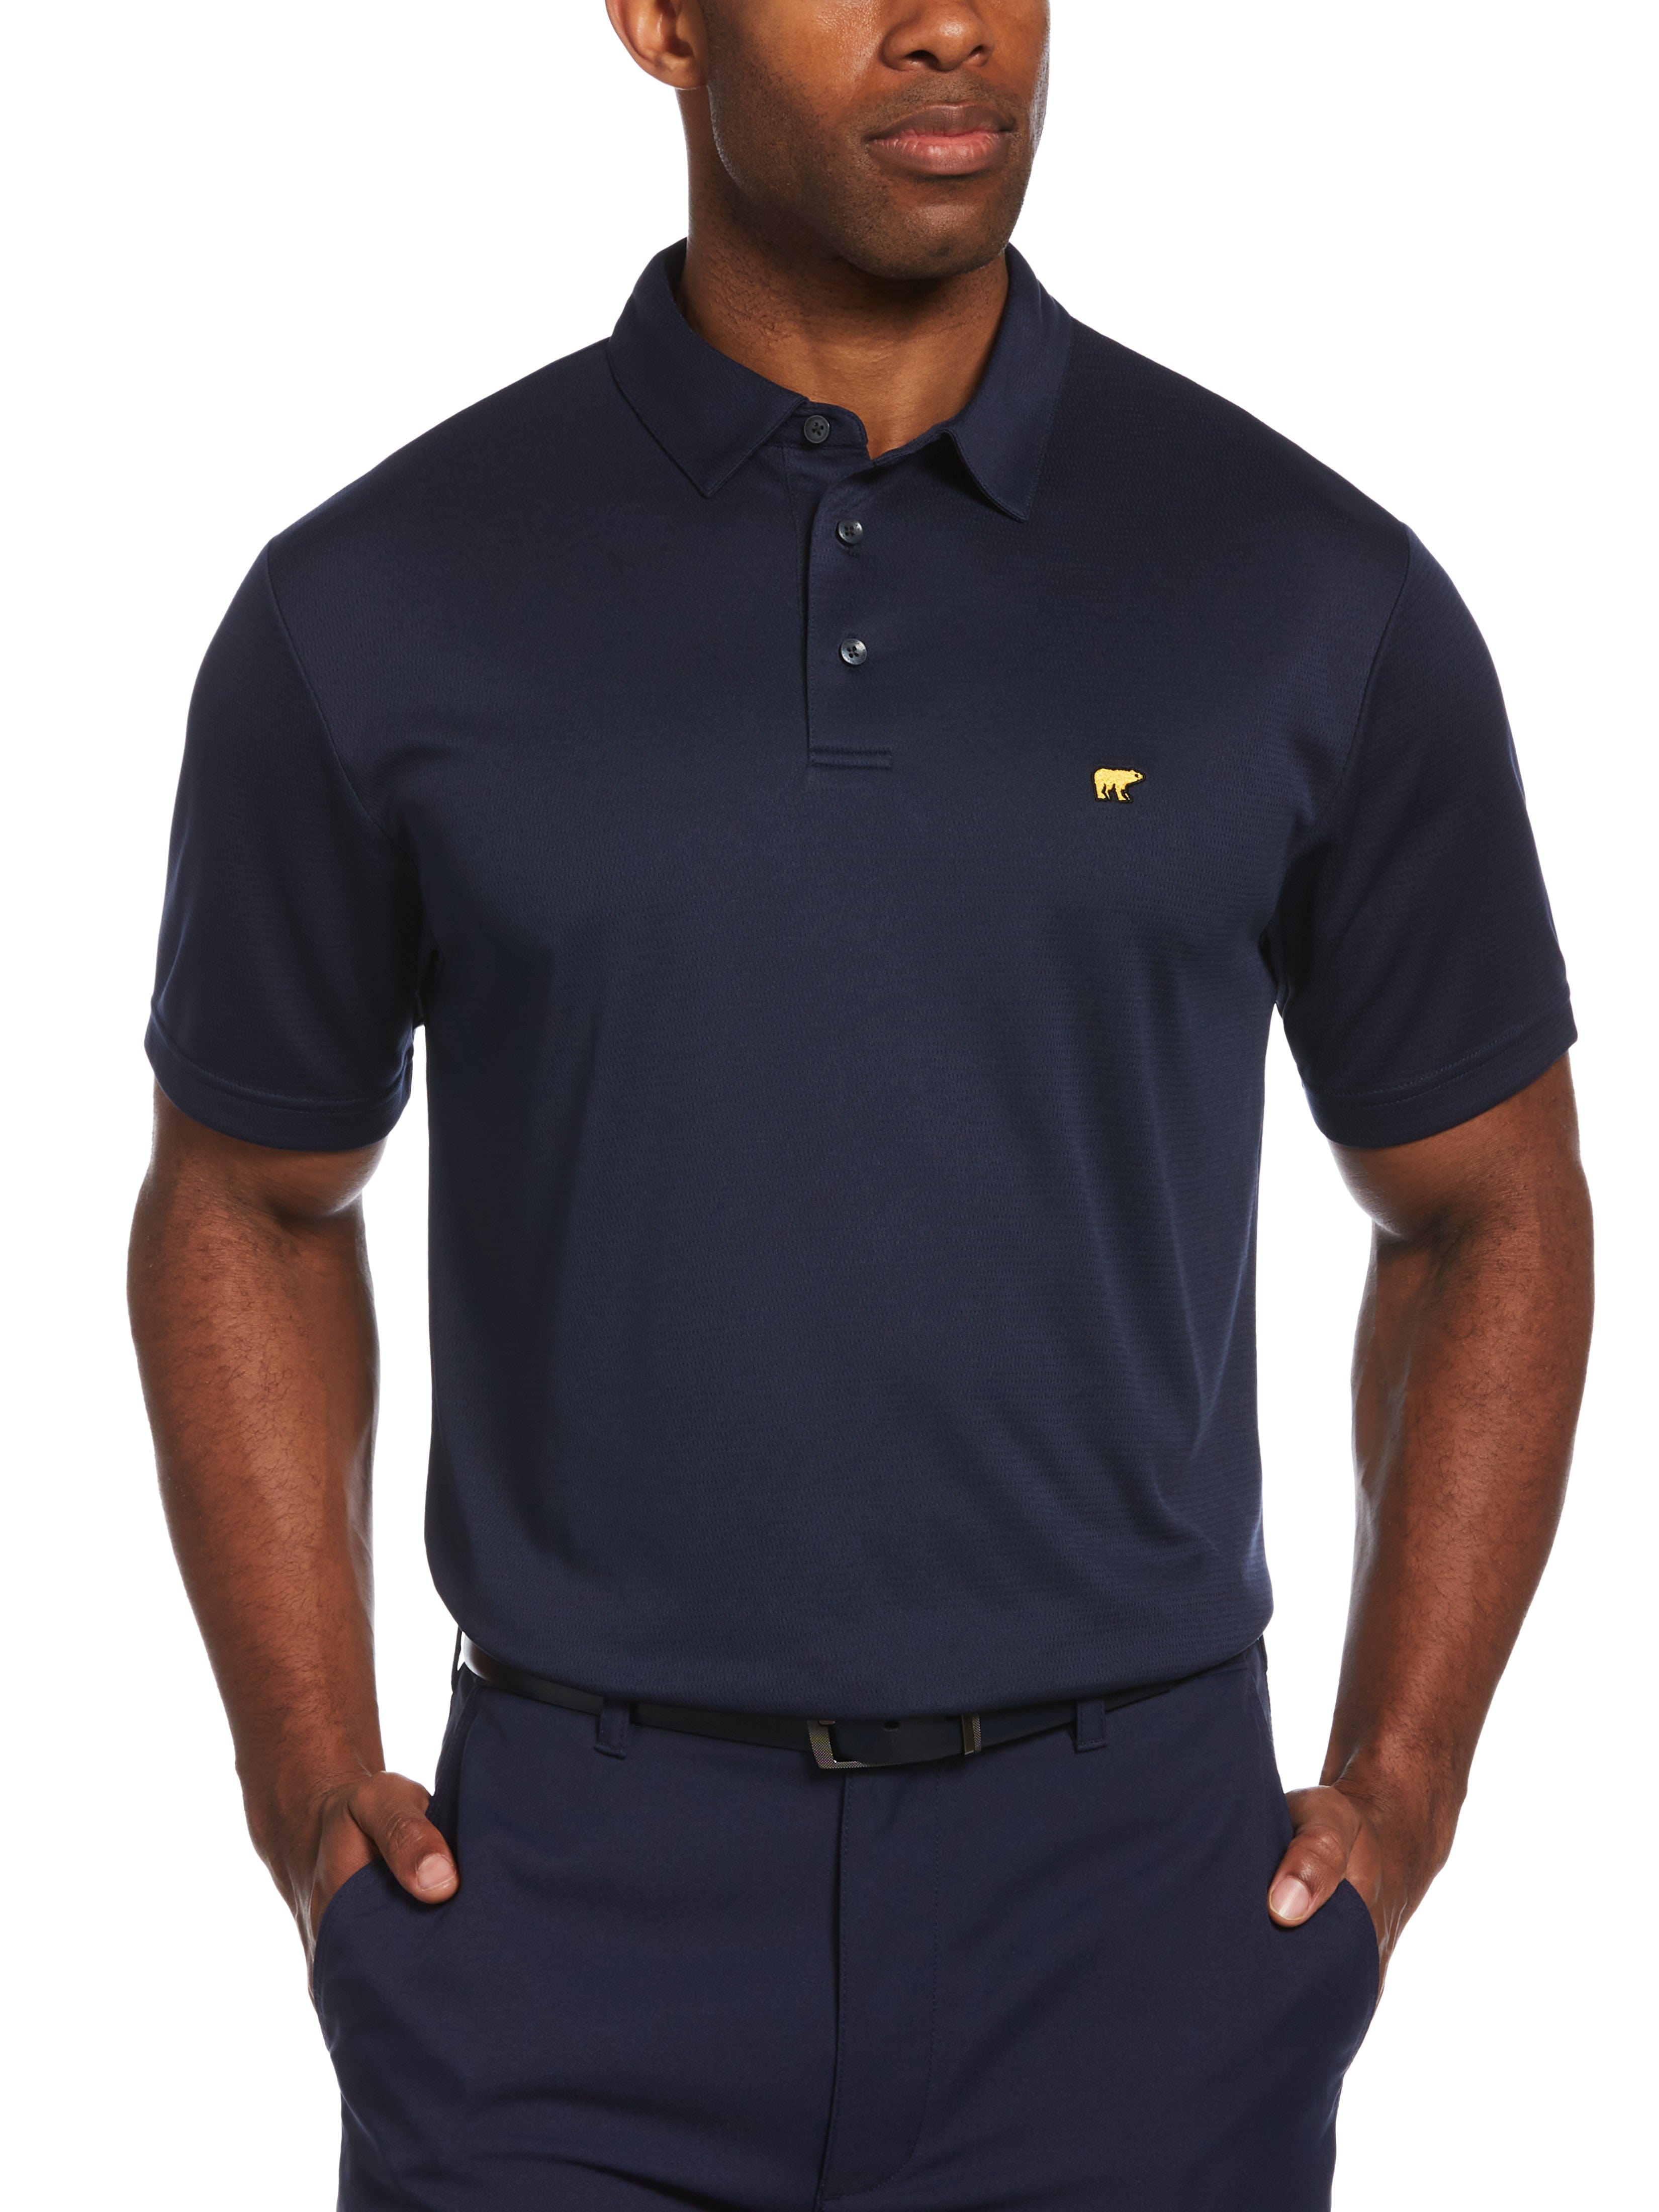 Jack Nicklaus Mens Solid Textured Golf Polo Shirt, Size Medium, Classic Navy Blue, 100% Polyester | Golf Apparel Shop